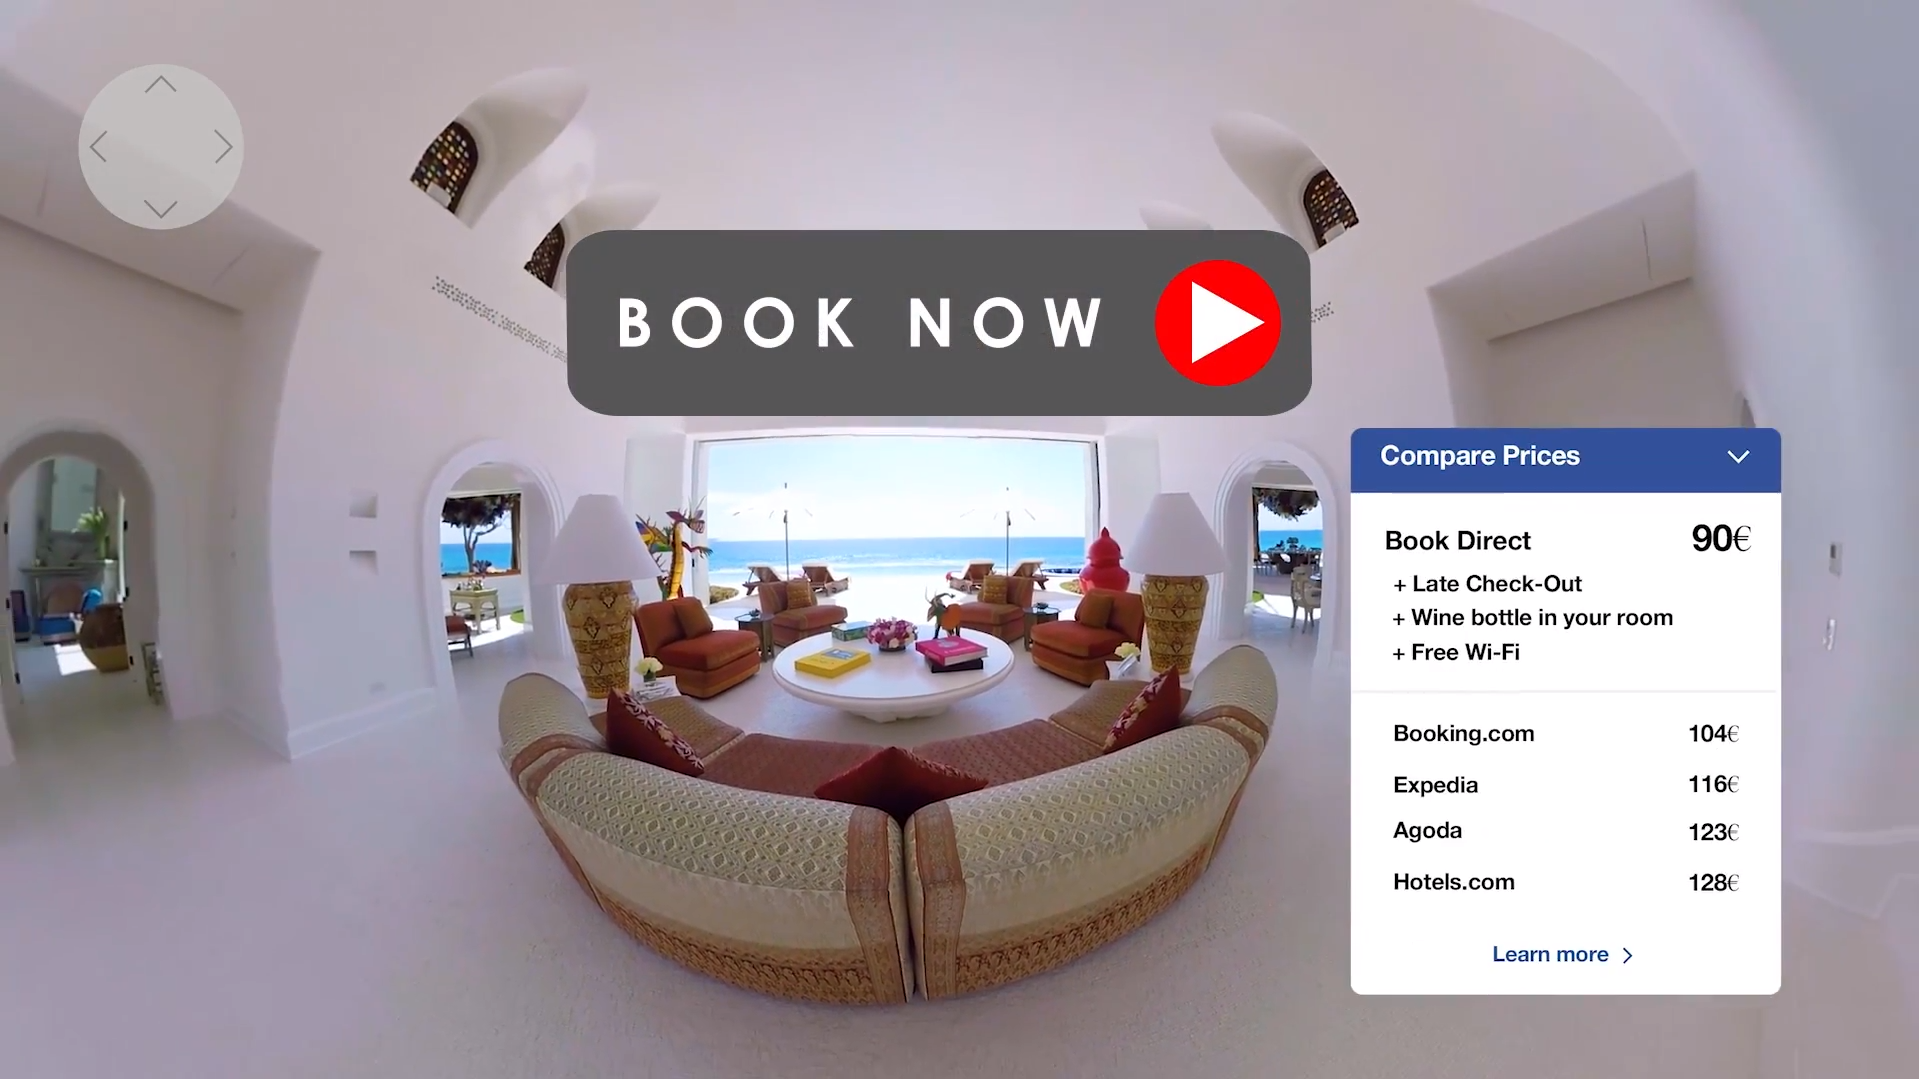 VR book now button with rate parity